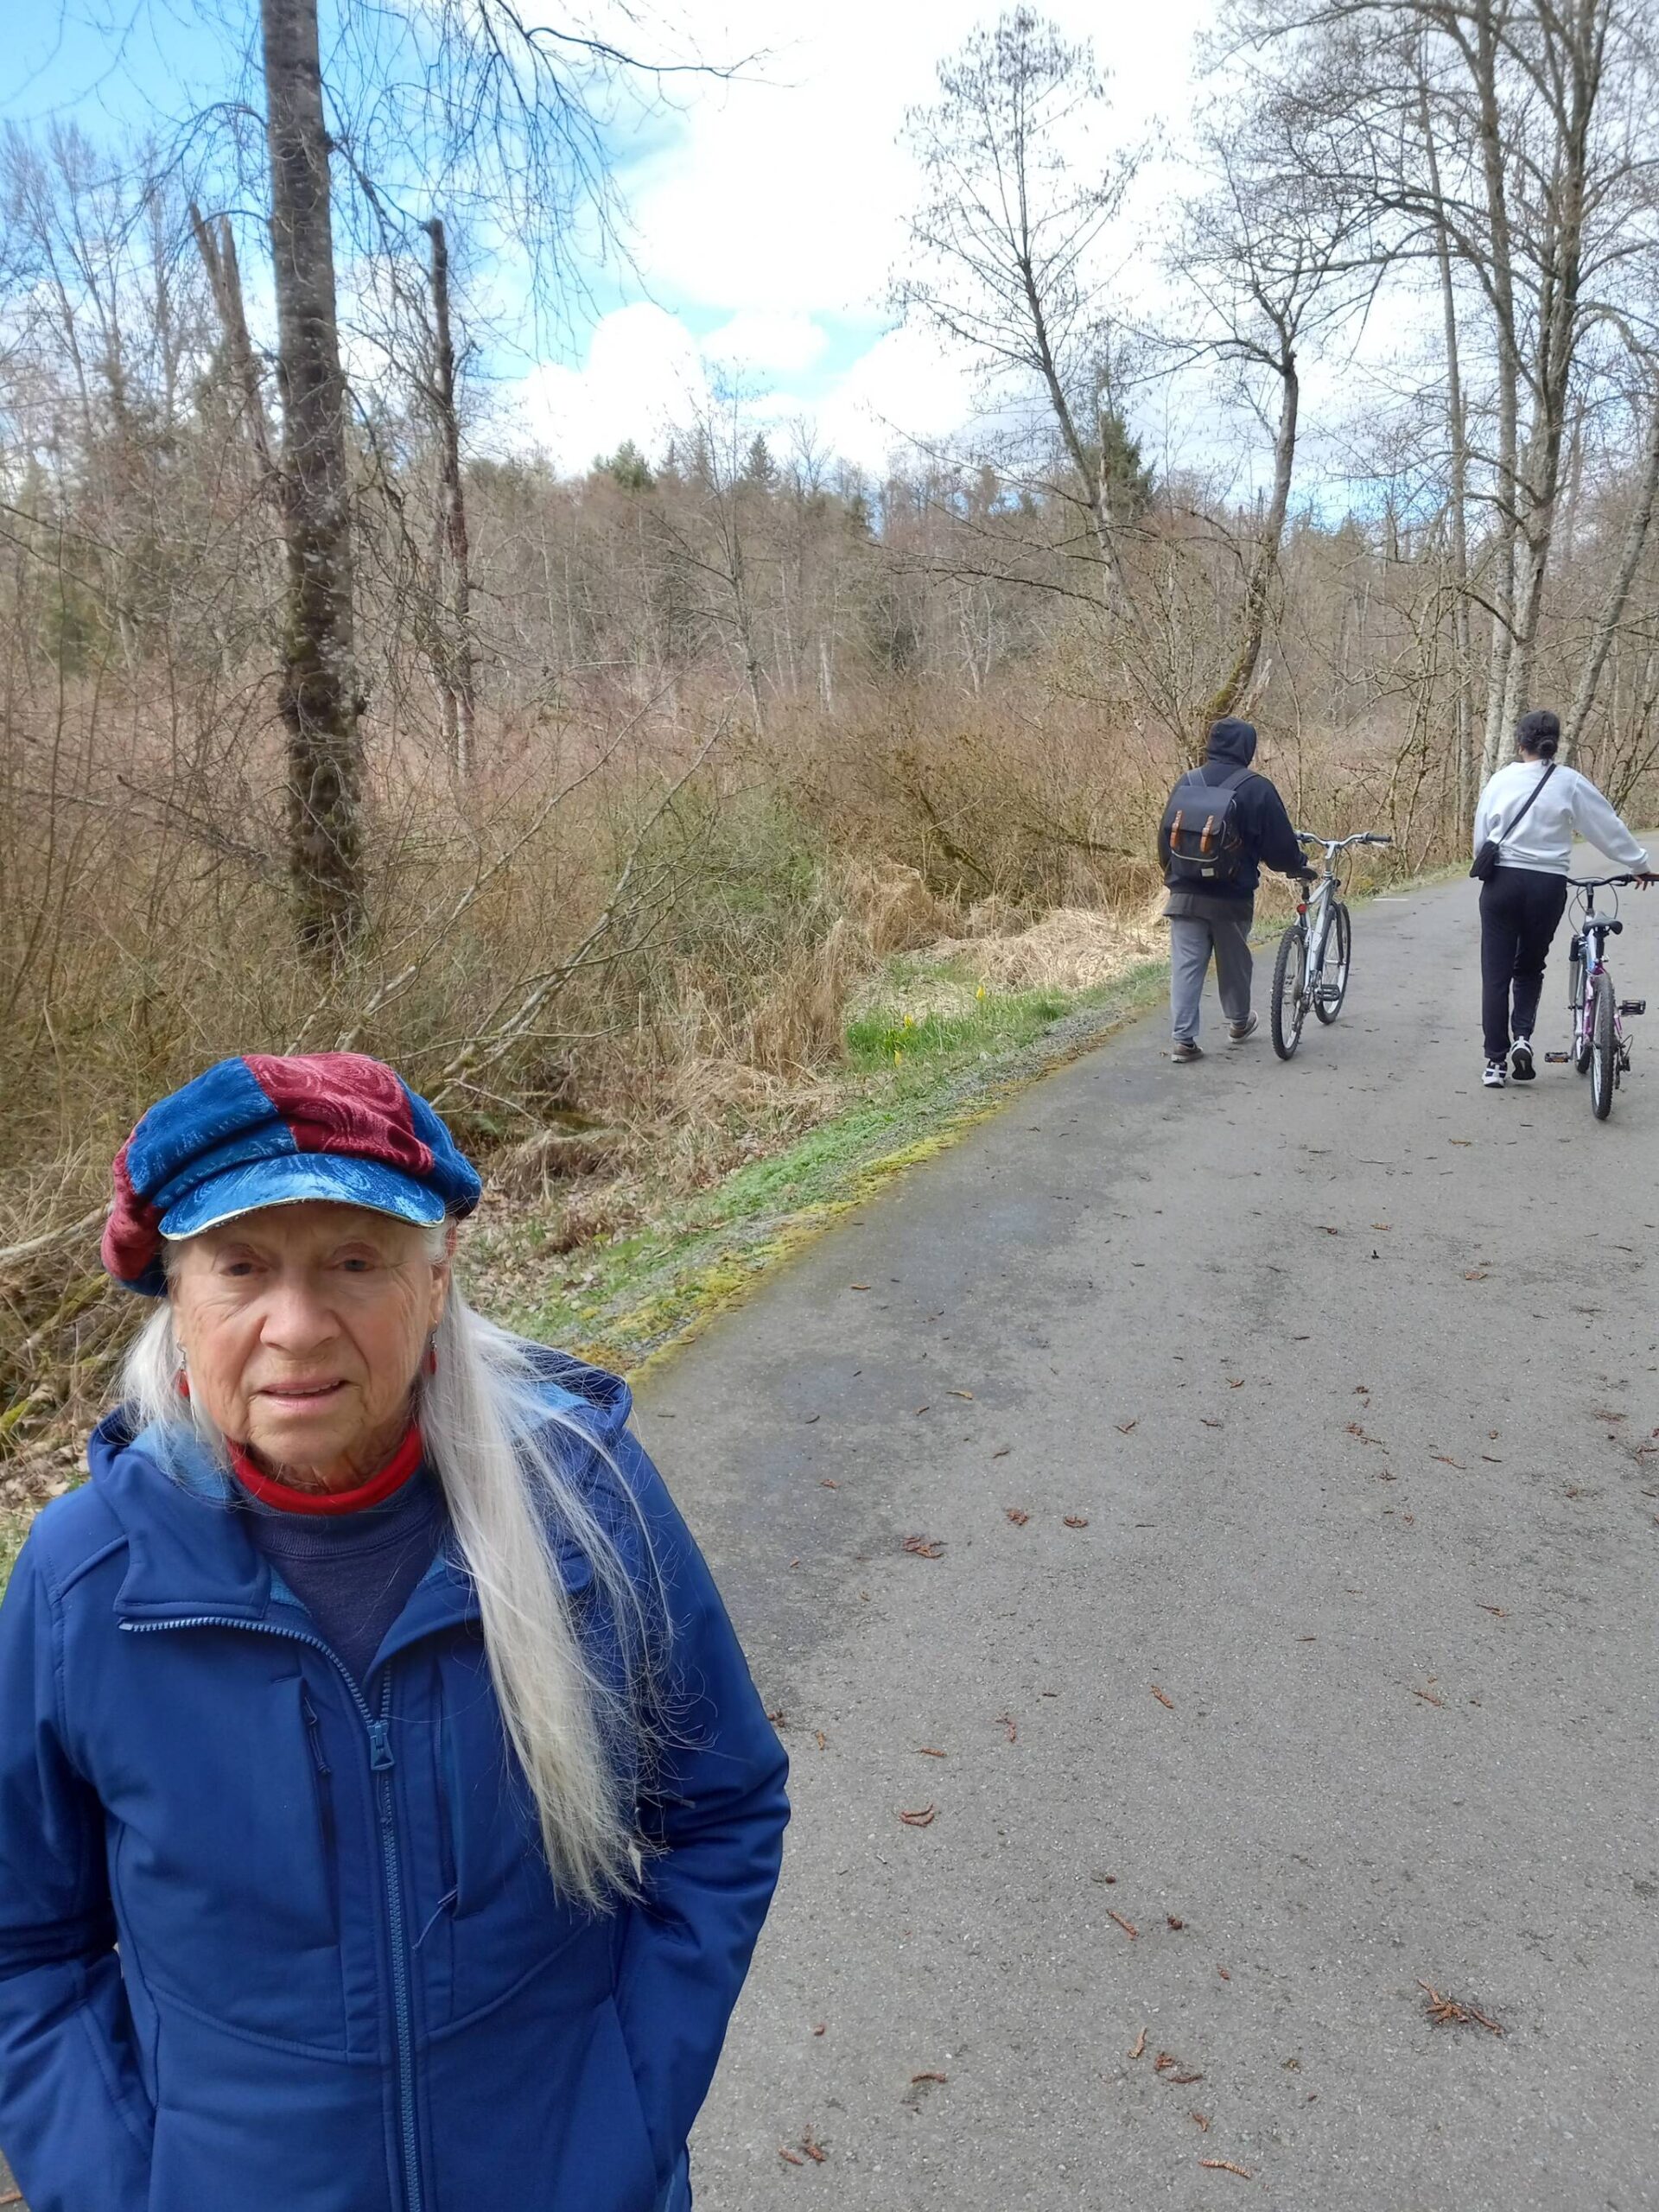 Photo by ROBERT WHALE, Auburn Reporter
Sarah Blum on a recent day on the Soos Creek Trail in Kent.